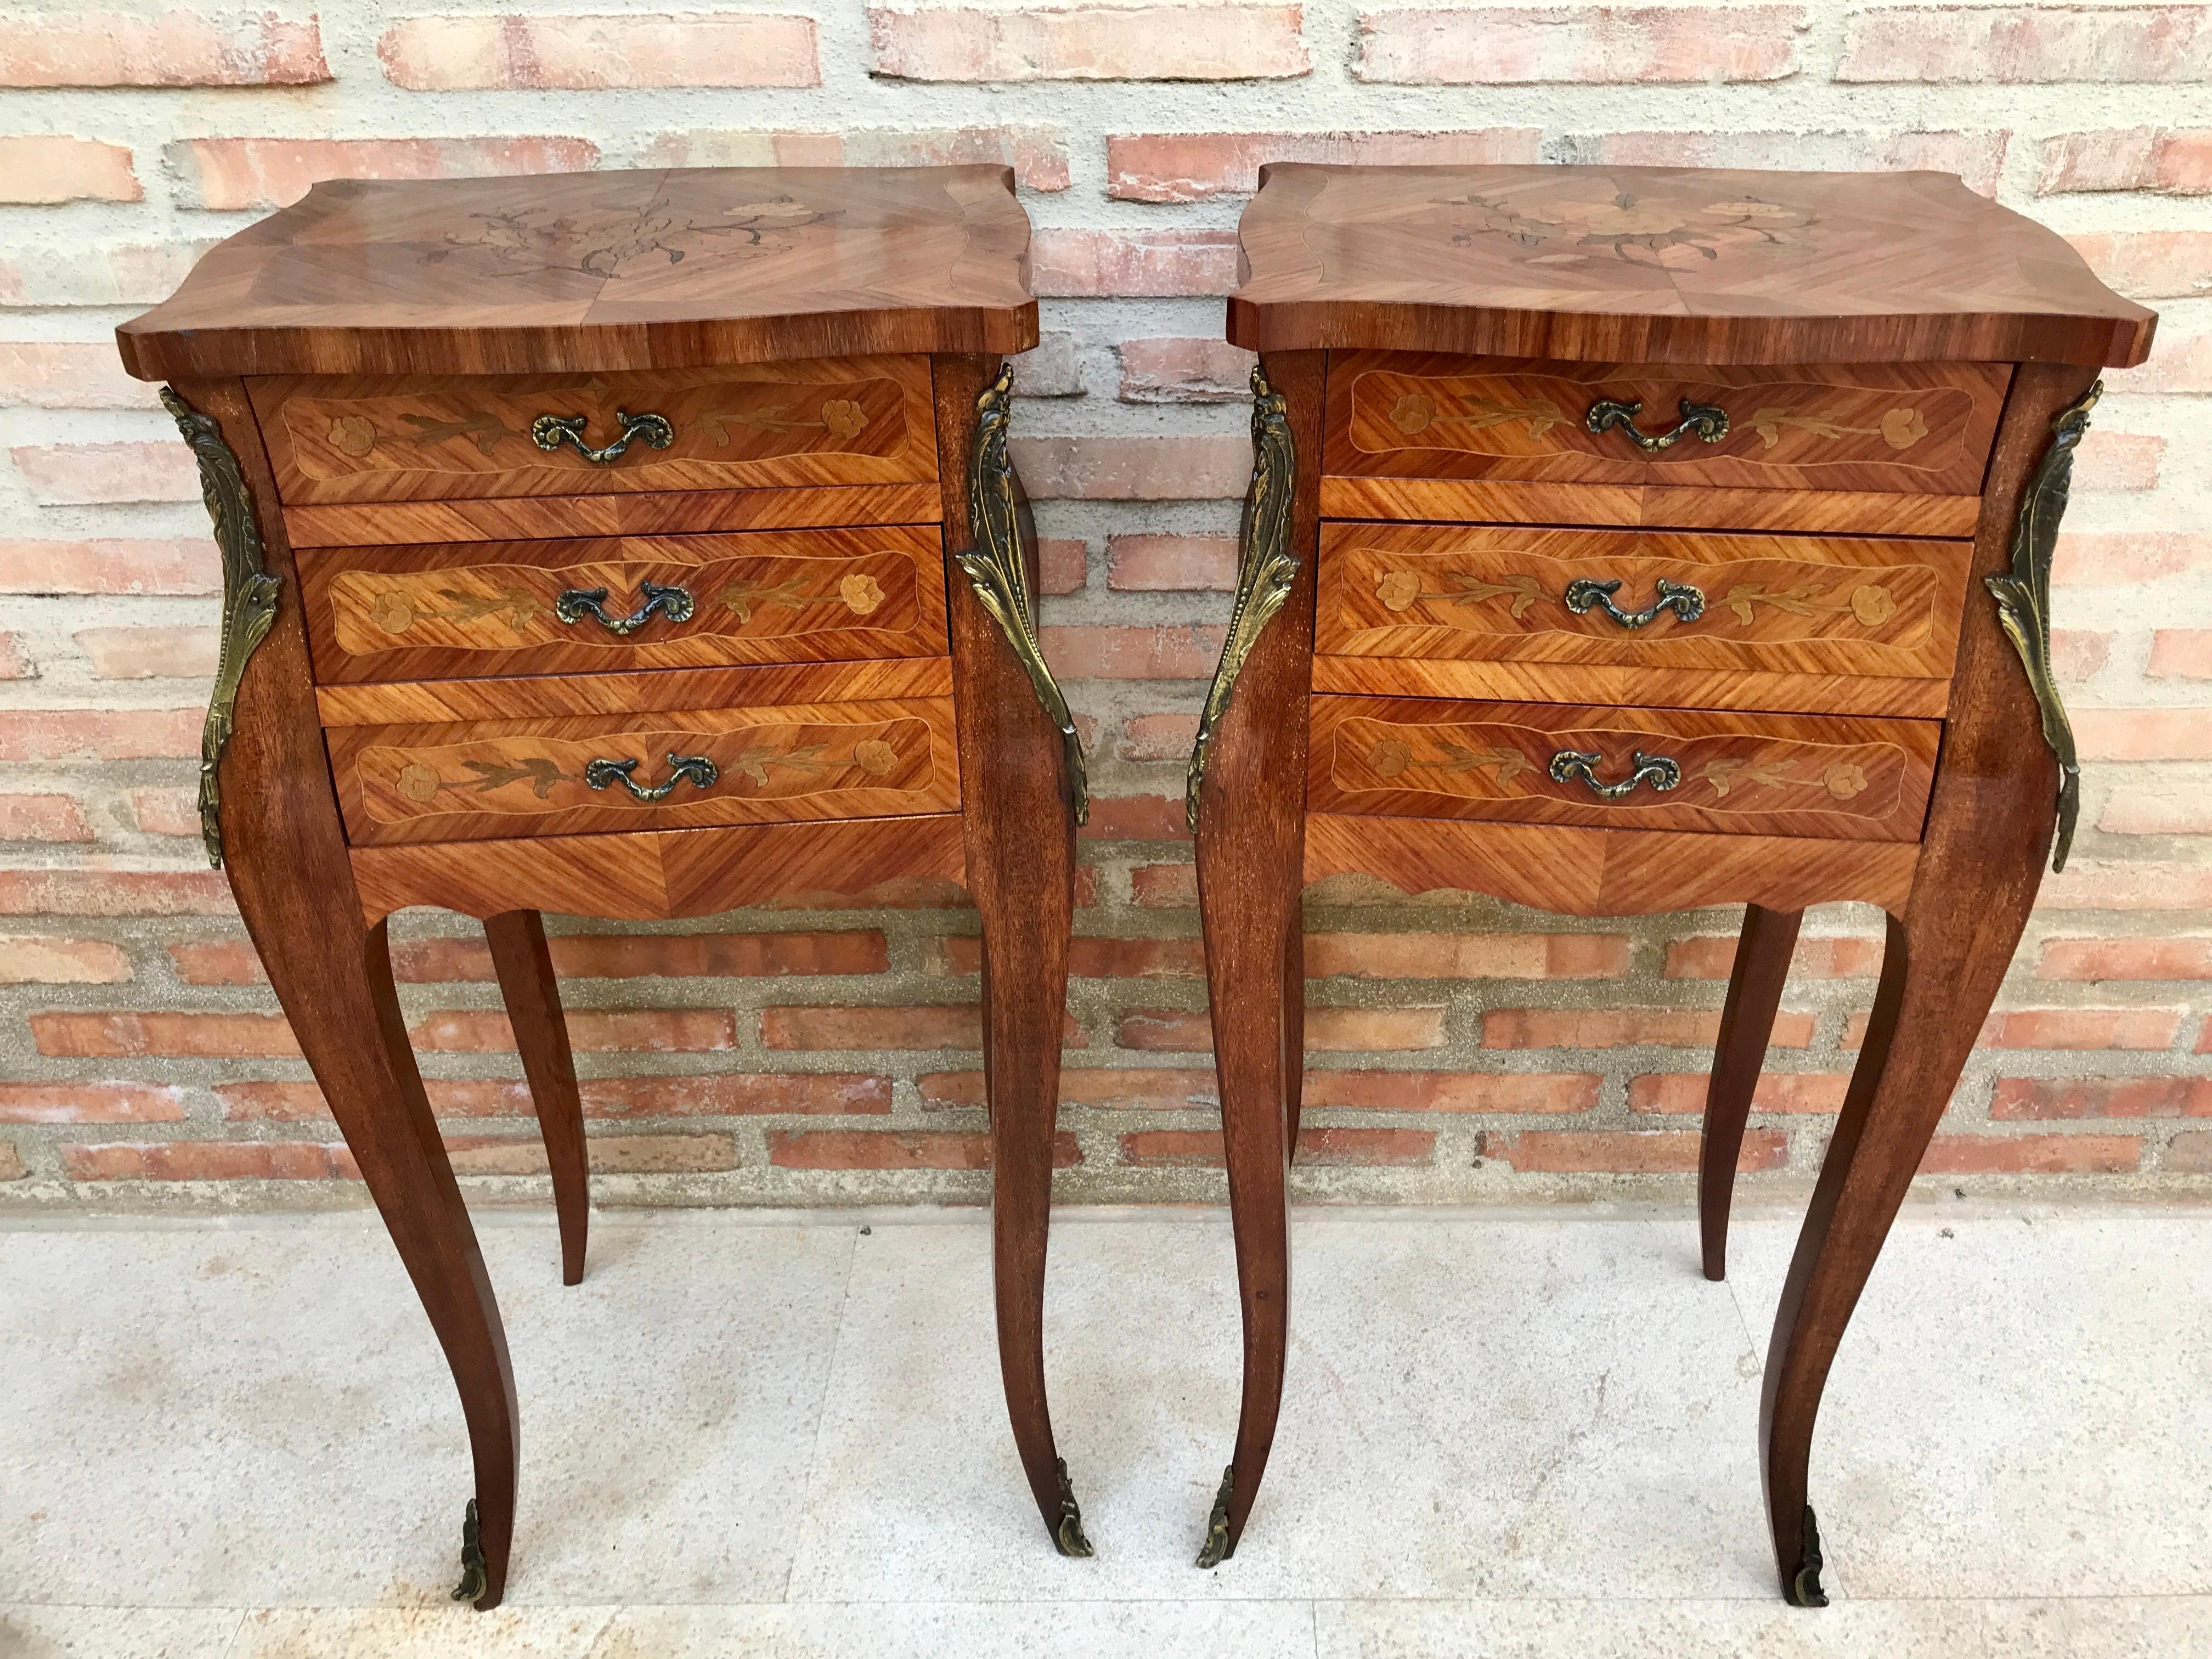 Pair of French Louis XV style nightstands with gorgeous floral and herringbone marquetry, herringbone inlaid box, gilt bronze mounts, three drawers with original bronze pulls and elegant legs with French kickstands and bronze trim.

Design Period